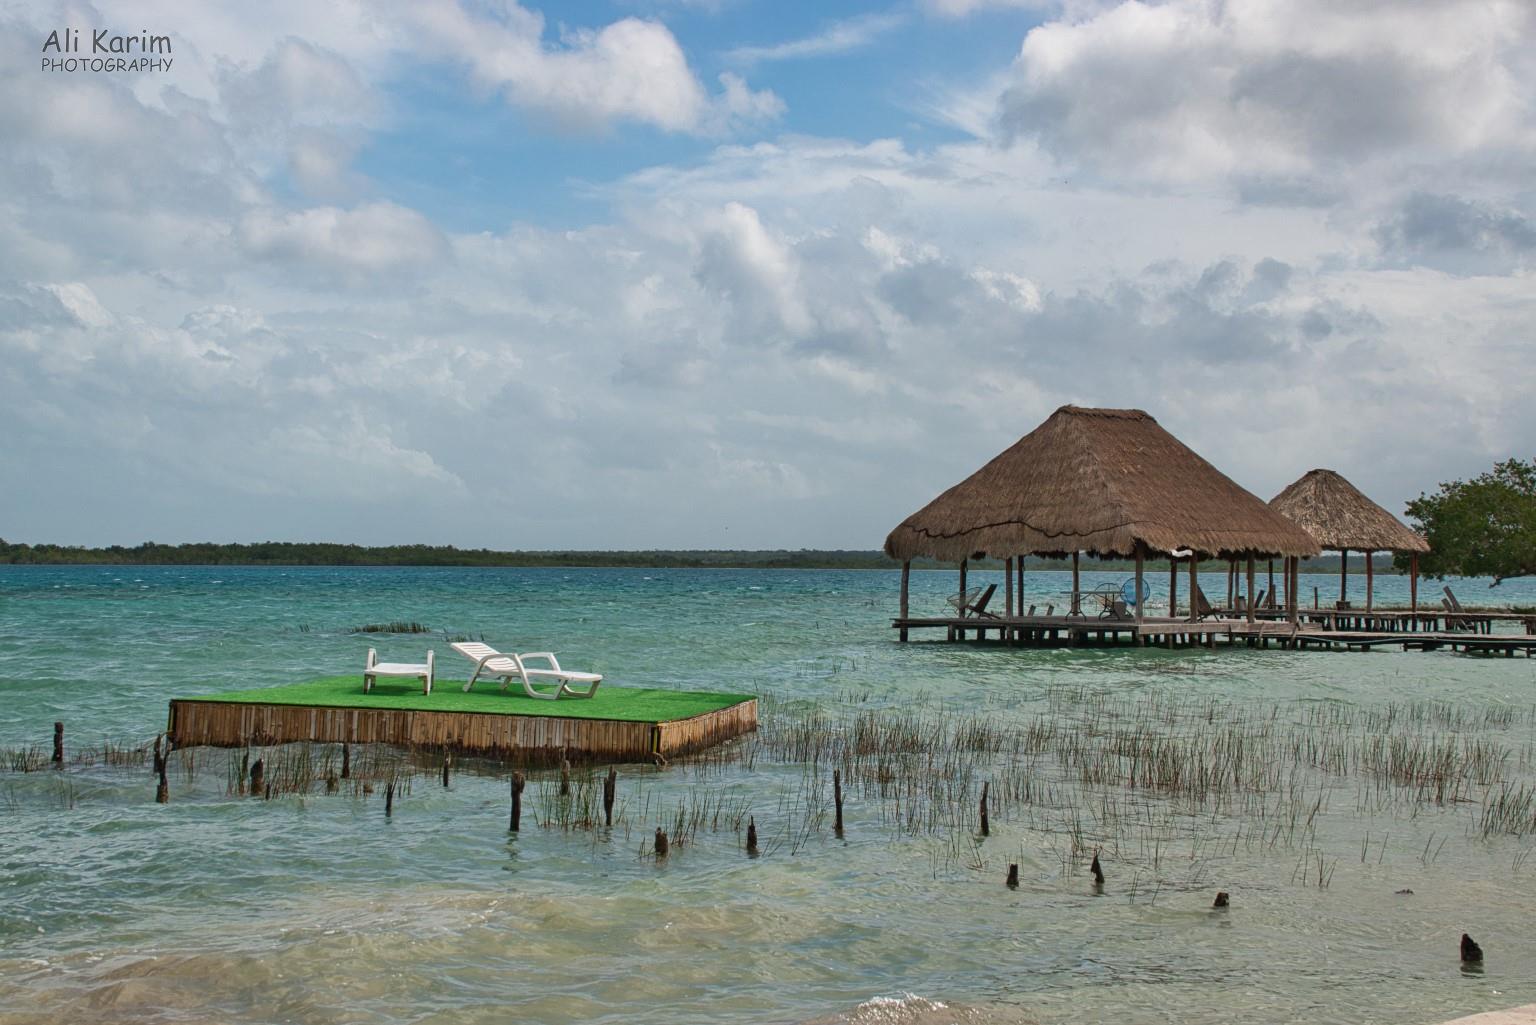 Bacalar & Mahahual, Mexico, Jan 2020, Floating docks like these were everywhere, at houses and hotels lining the laguna